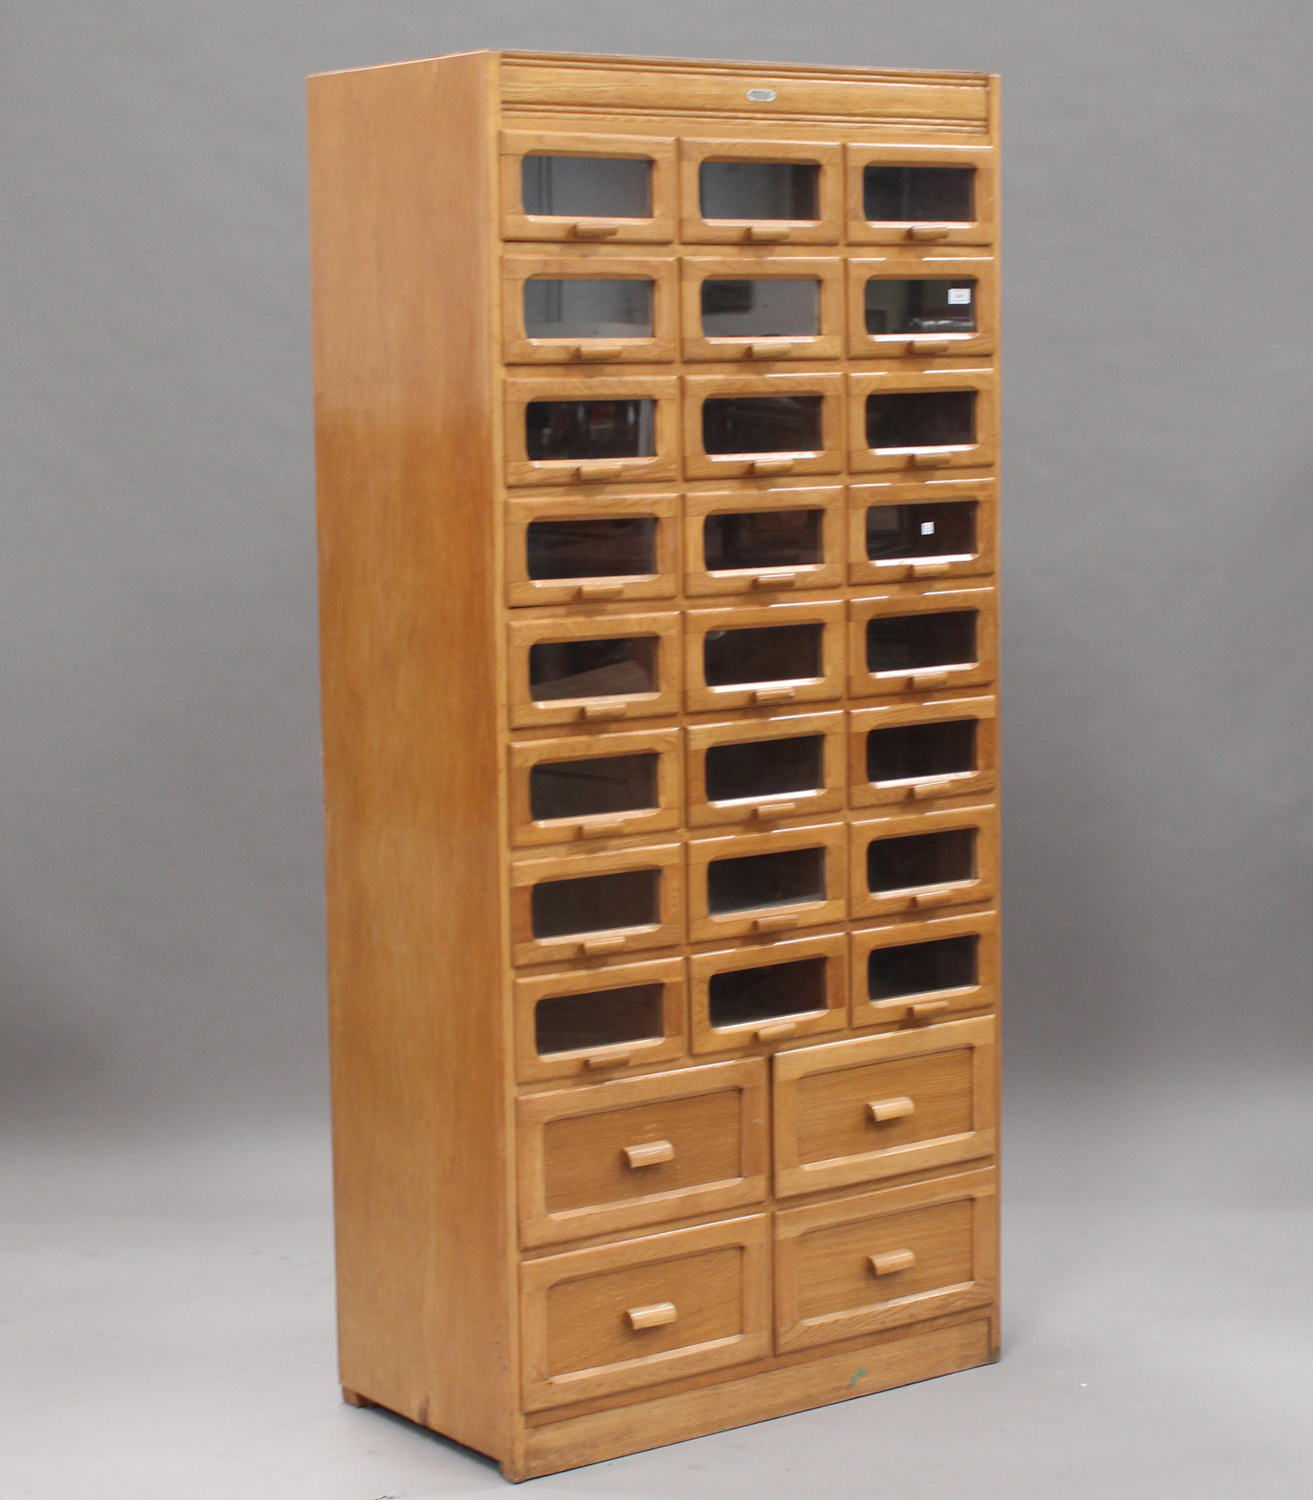 A mid-20th century pale oak haberdashery cabinet by Liddle, Keen & Co, London, fitted with twenty-